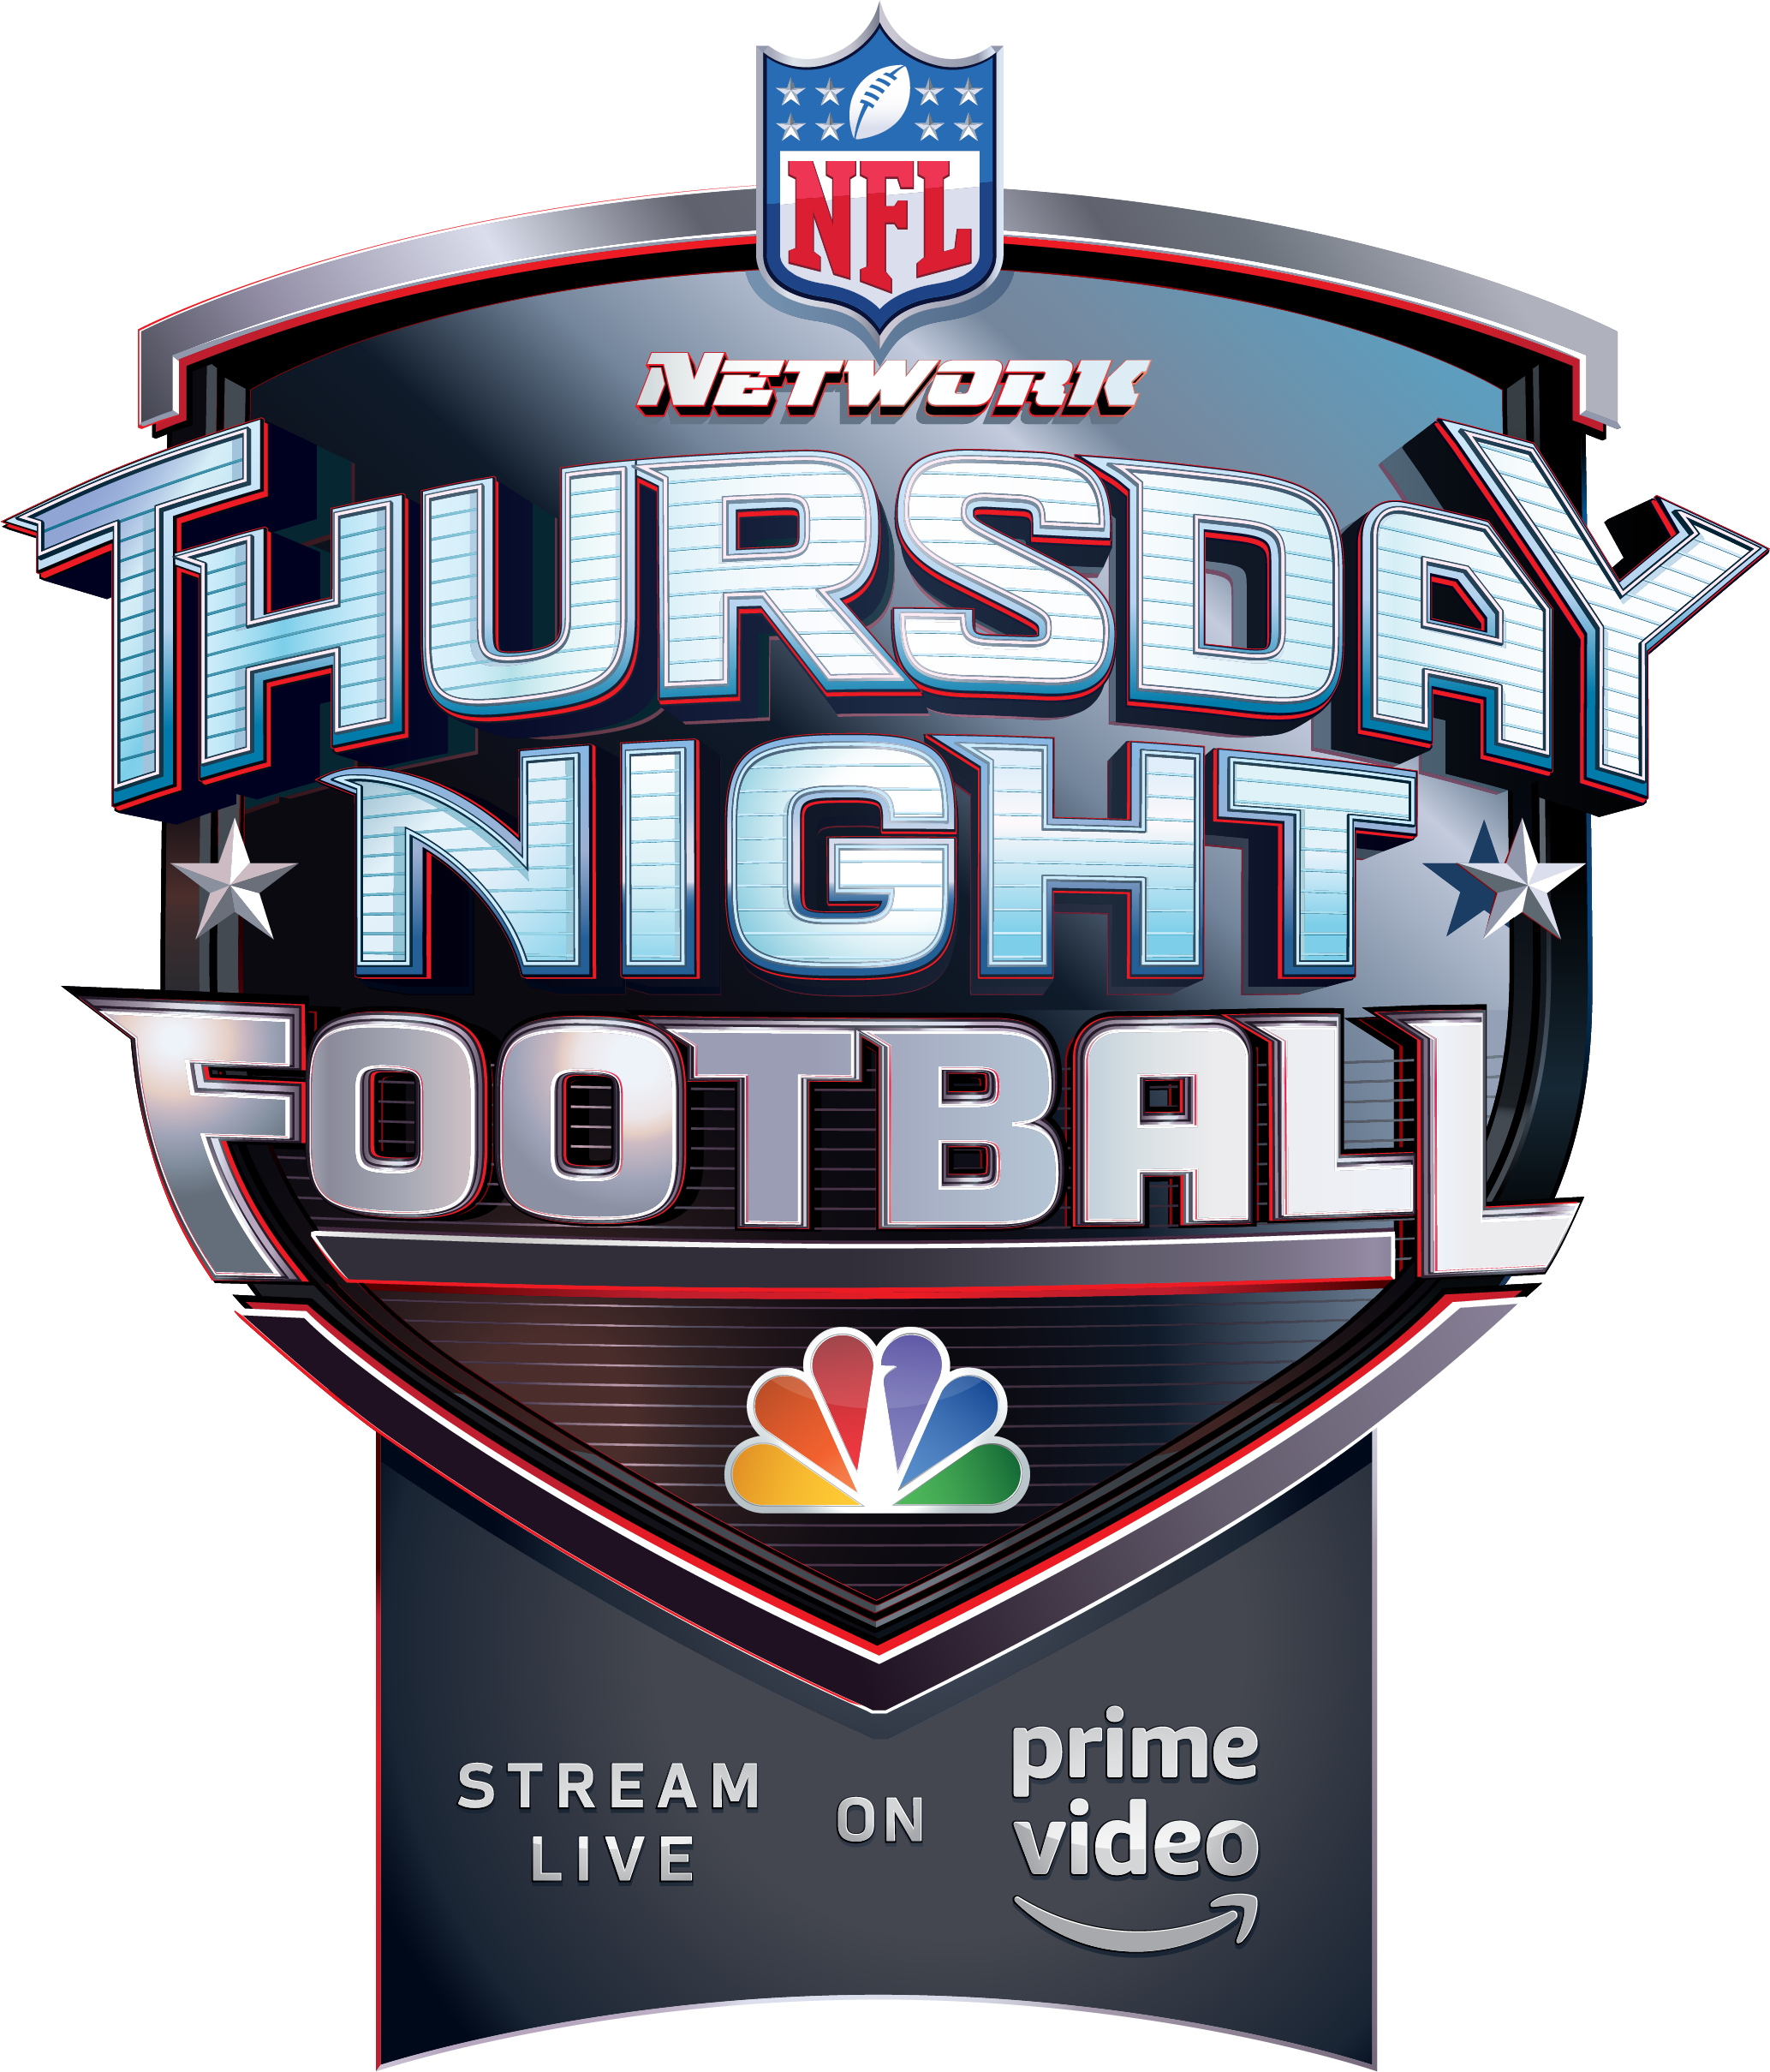 thursday night football comes on what channel